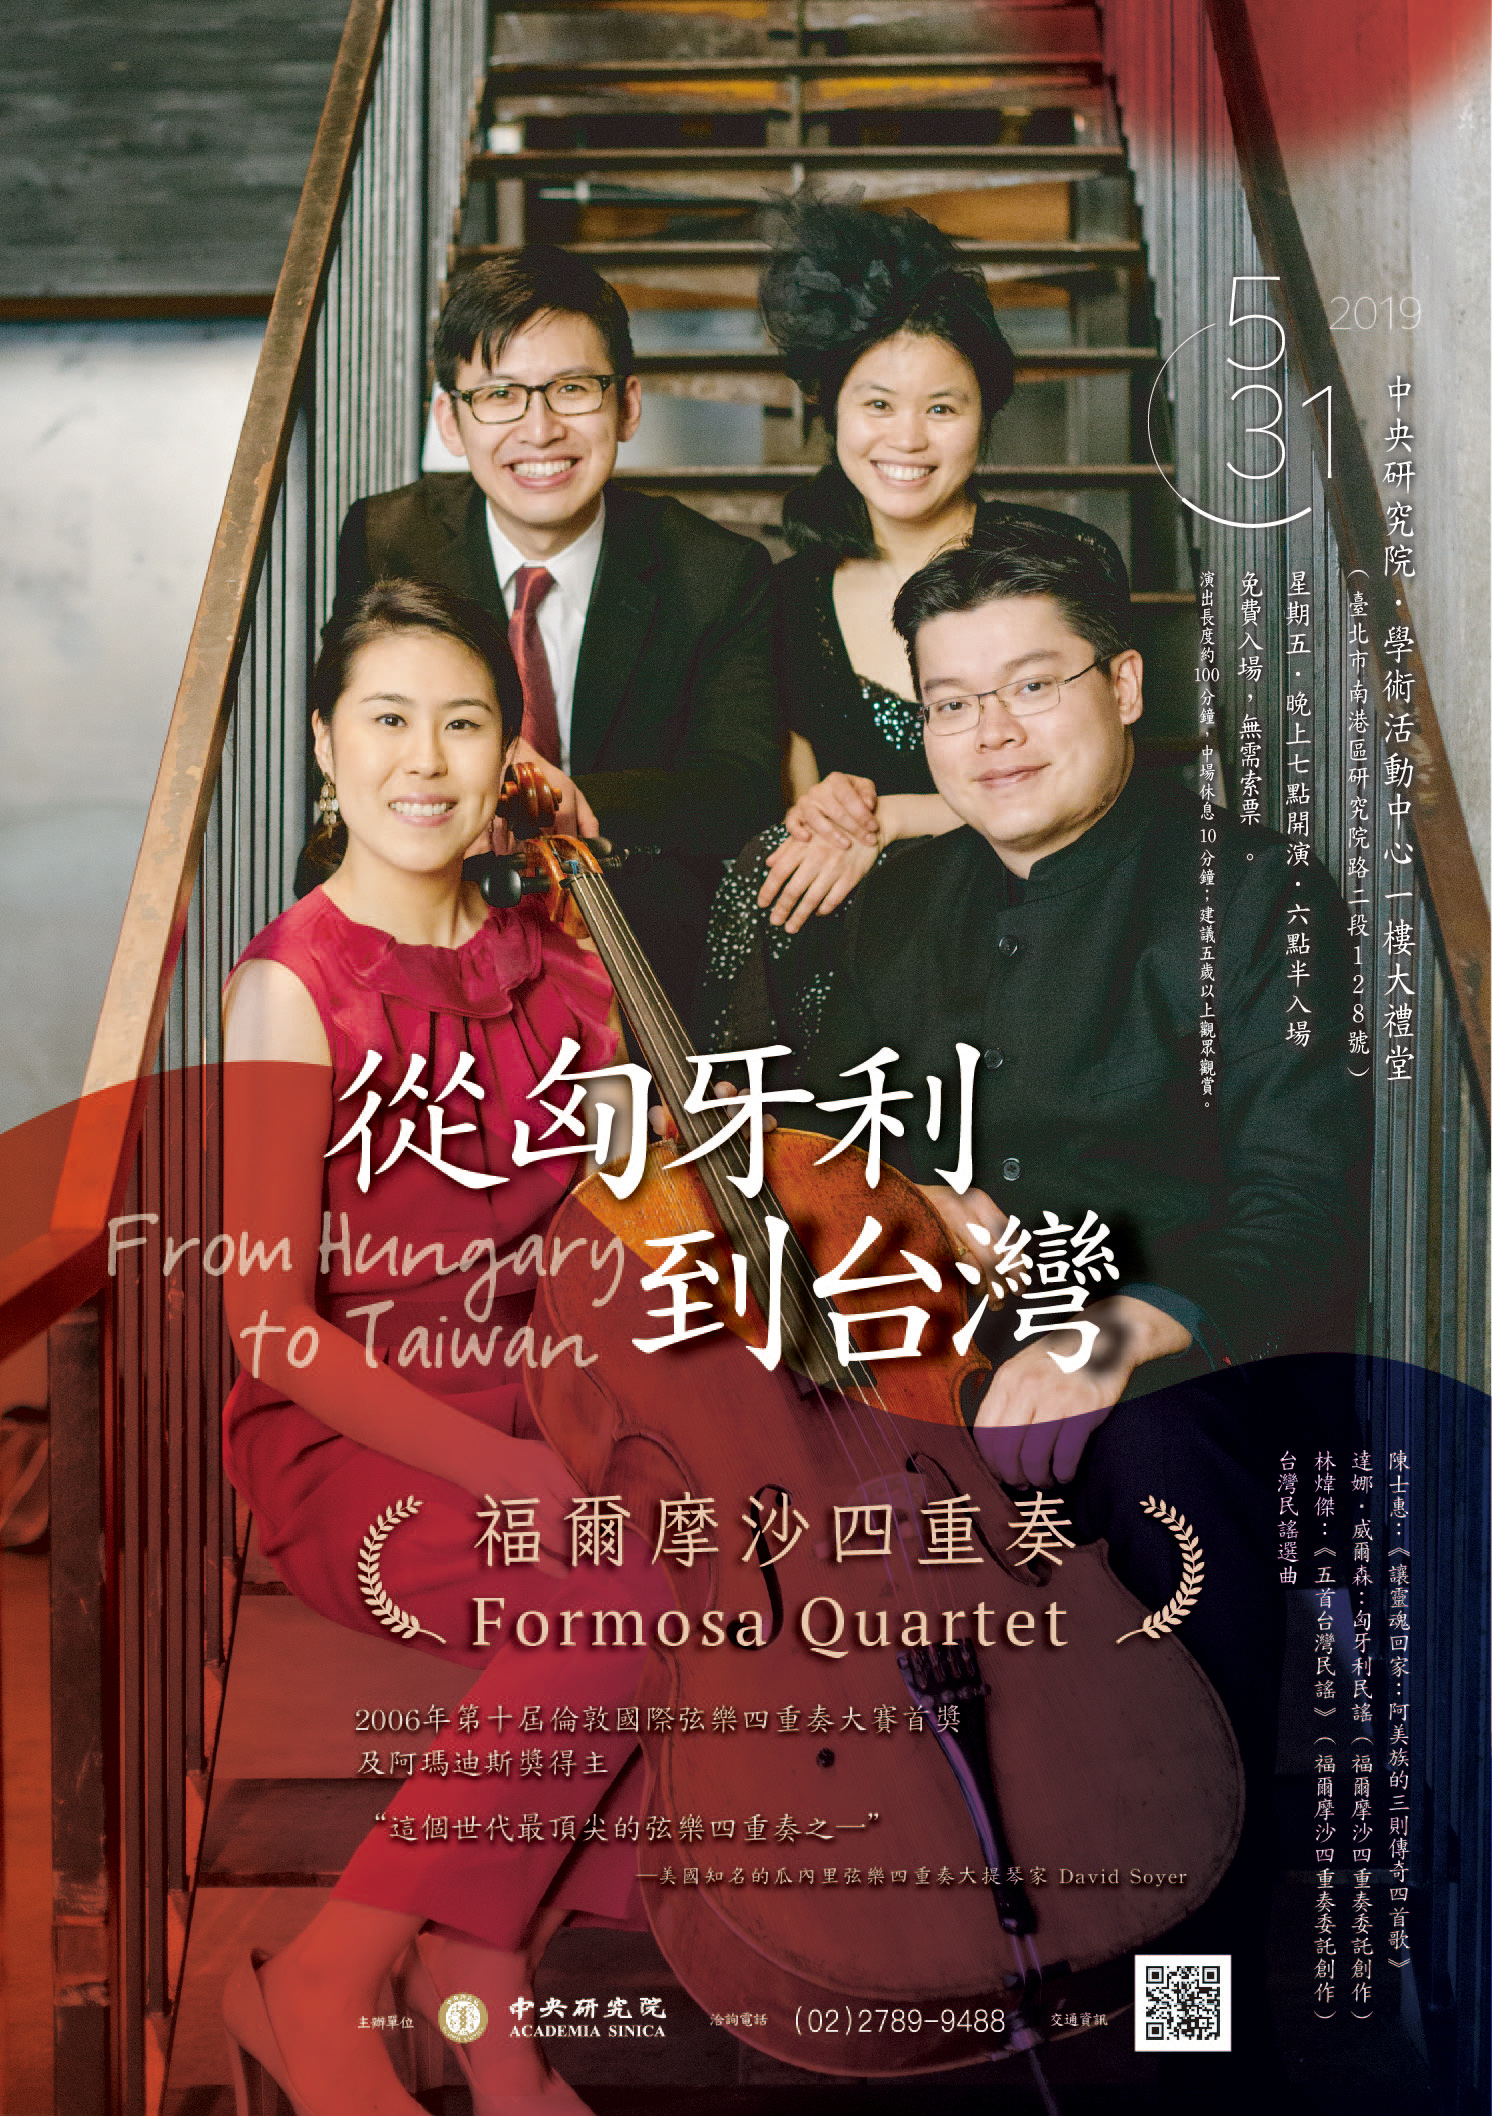 2019 Artistic Activities: From Hungary to Taiwan– Formosa Quartet